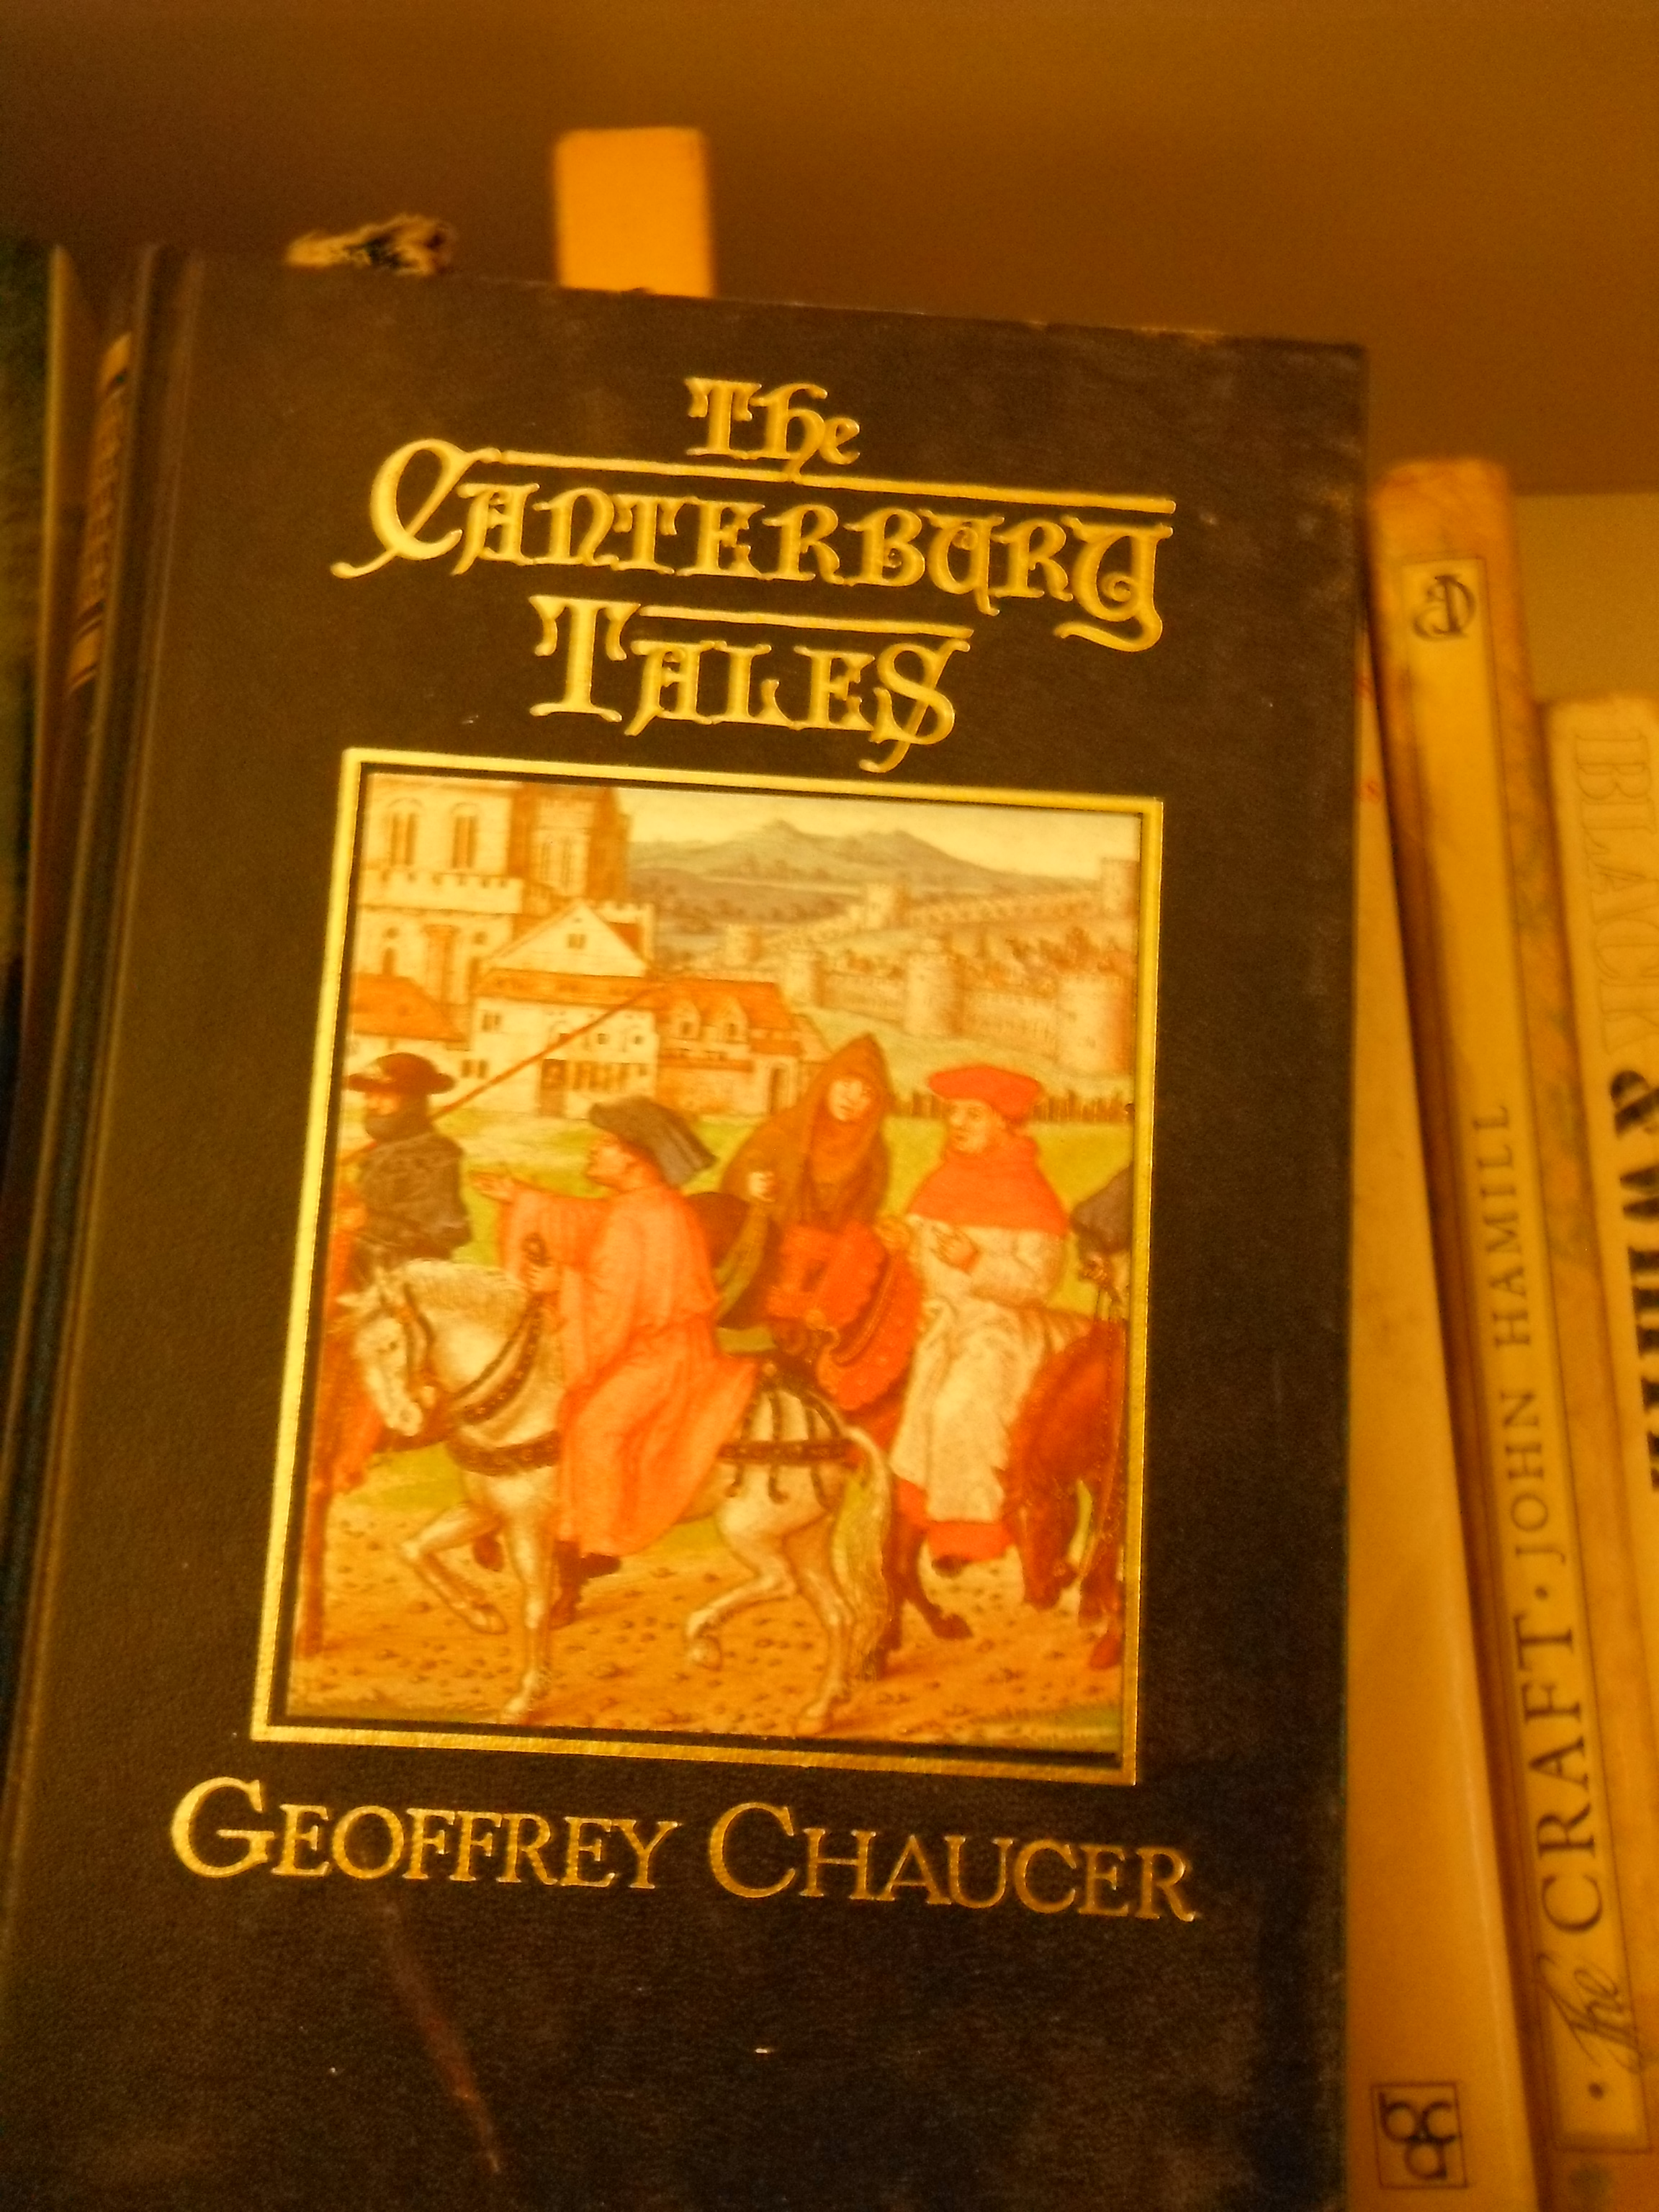 Photo taken by me – front cover to Chaucer’s Canterbury Tales